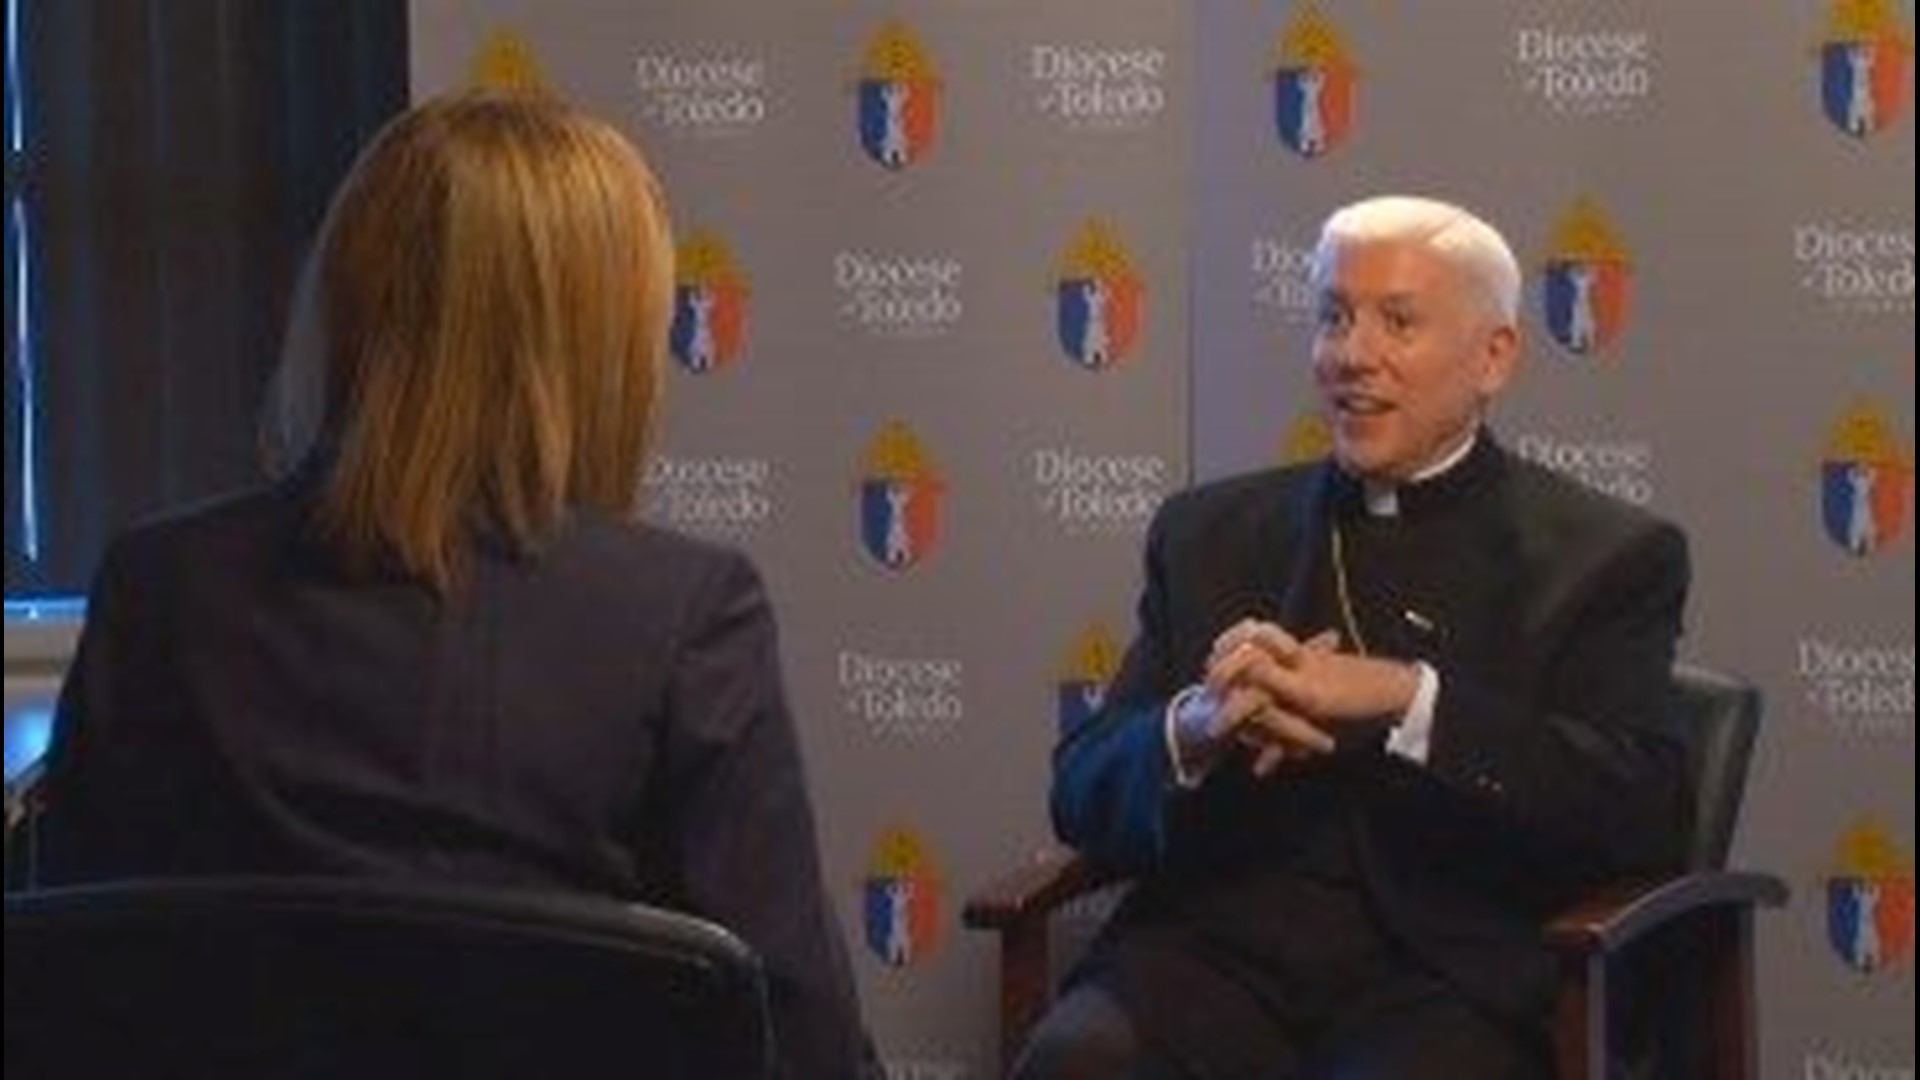 FULL INTERVIEW: Emilie Voss sits down with Bishop Daniel Thomas